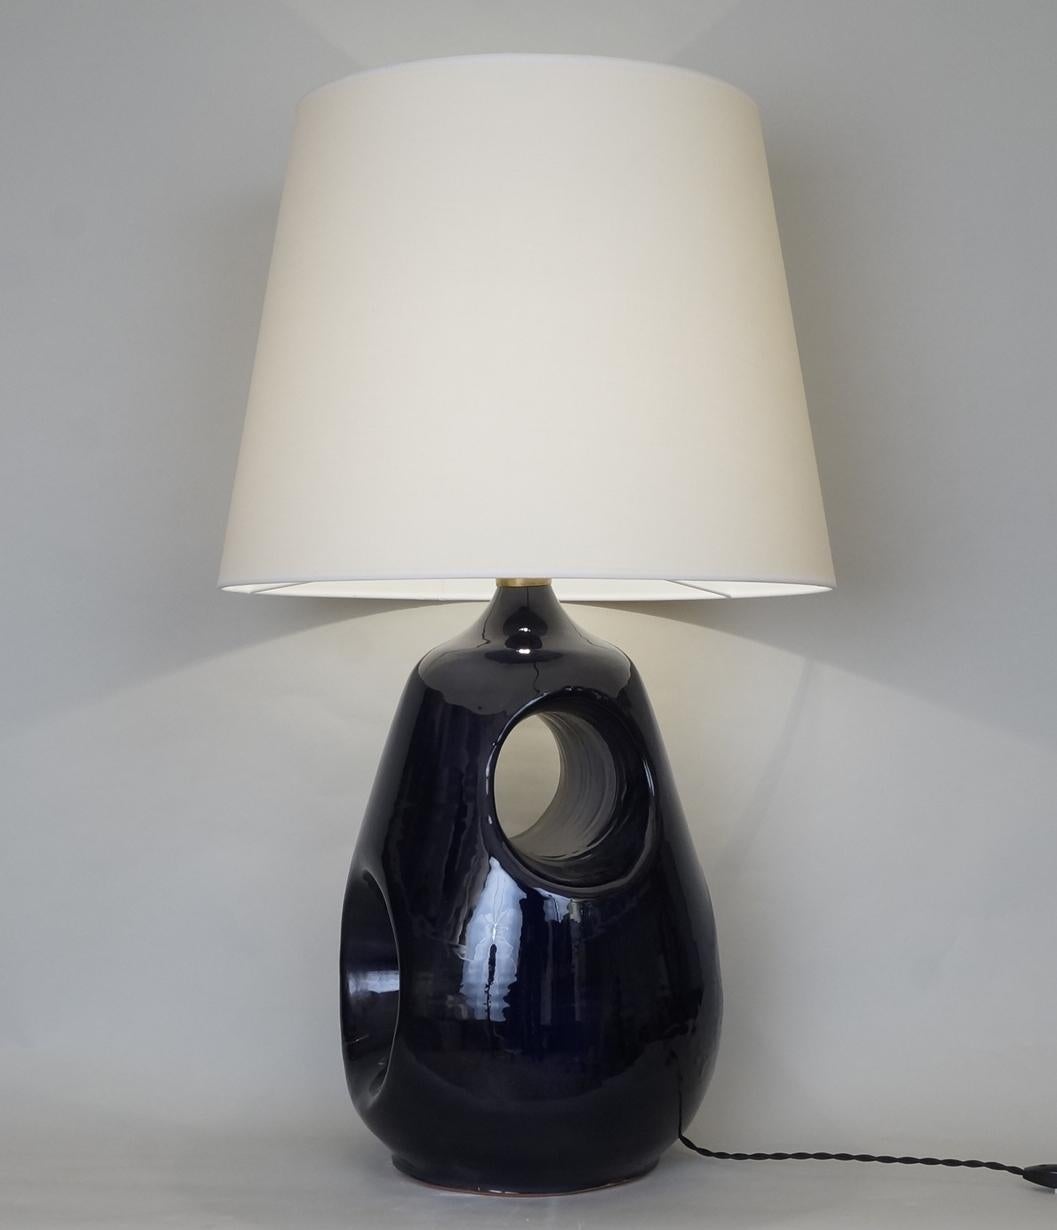 Midnight blue enameled ceramic table lamp, custom made upholstered lampshade.
Signed A Dalmasso Vallauris, 1986
Rewired with twisted silk cord
Measures: Ceramic height 46 cm – 18.1in
Height with shade 79 cm – 31.1in.